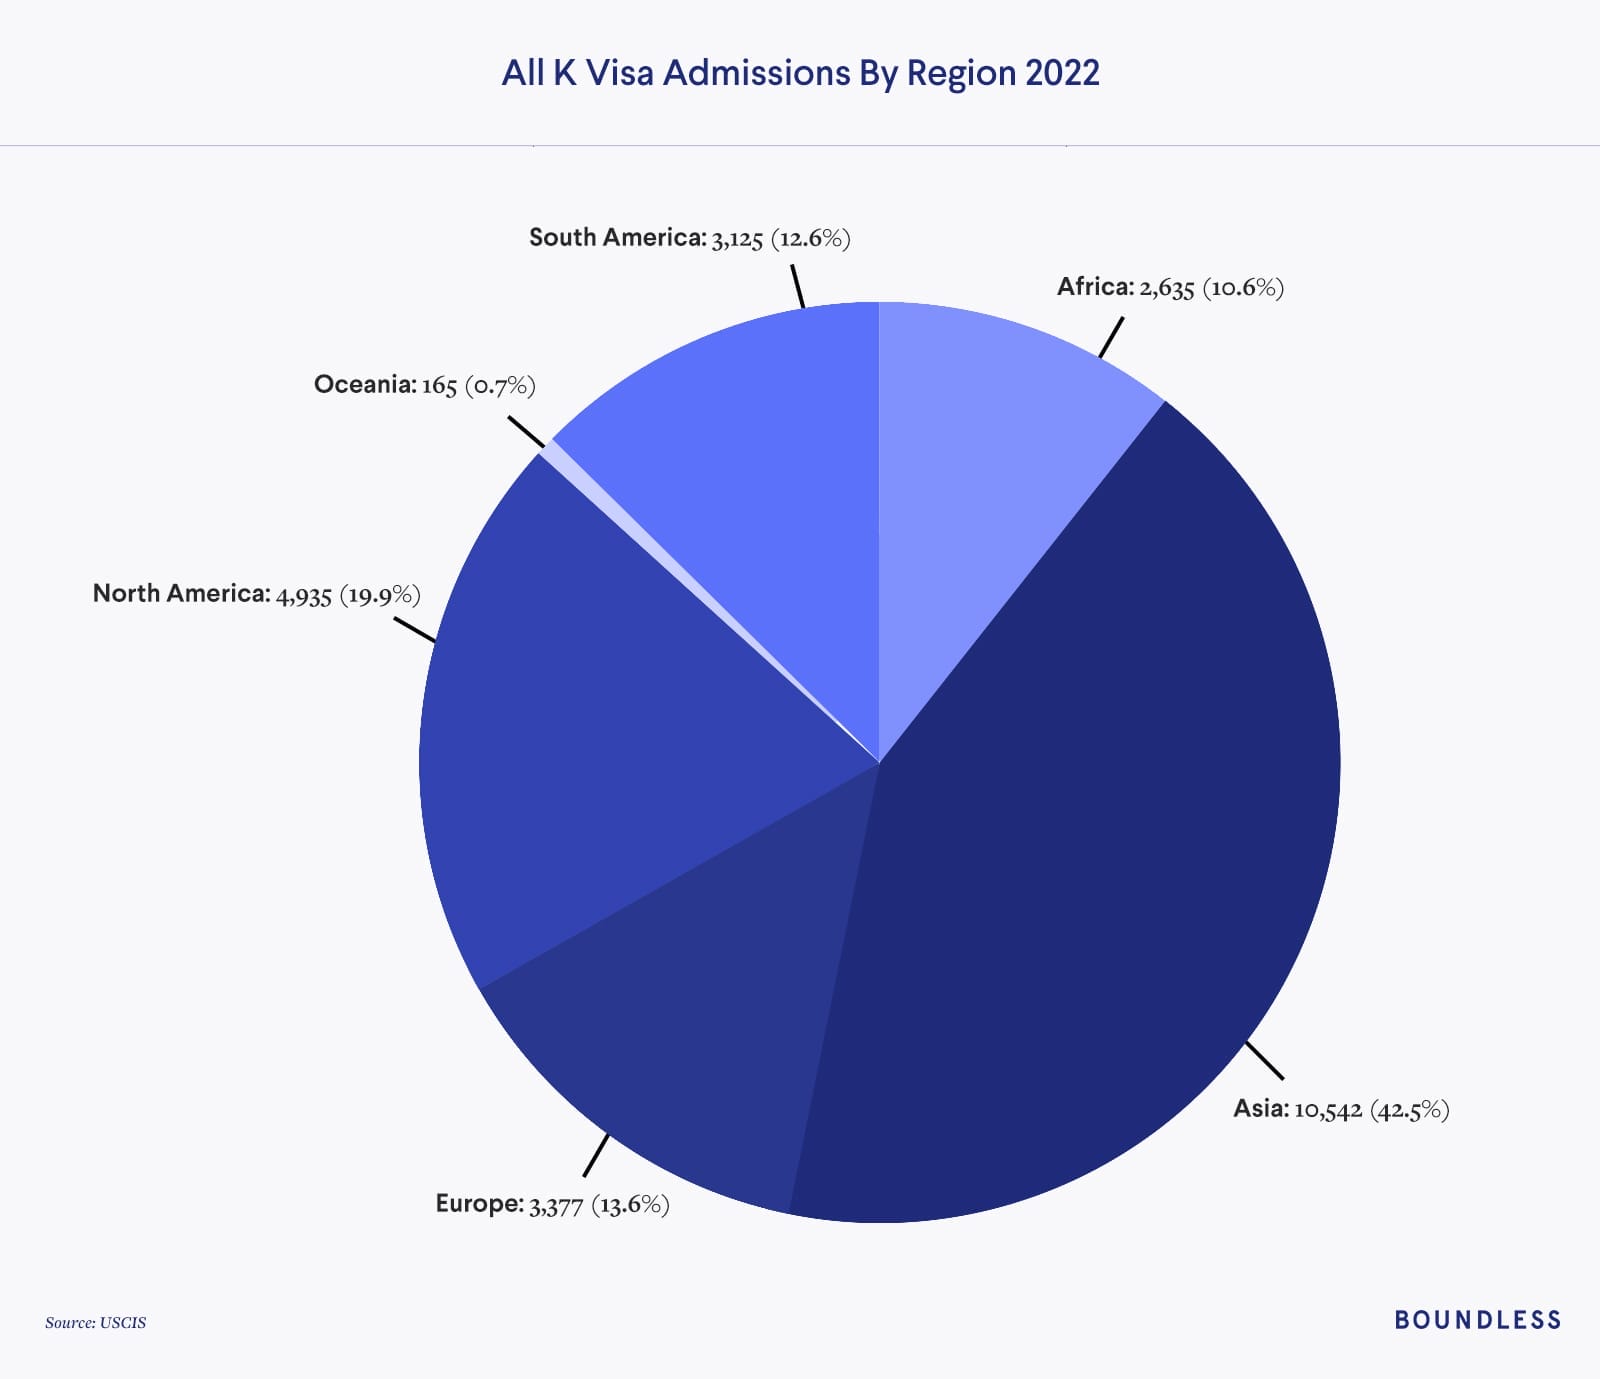 A pie chart showing K-1 admissions by region